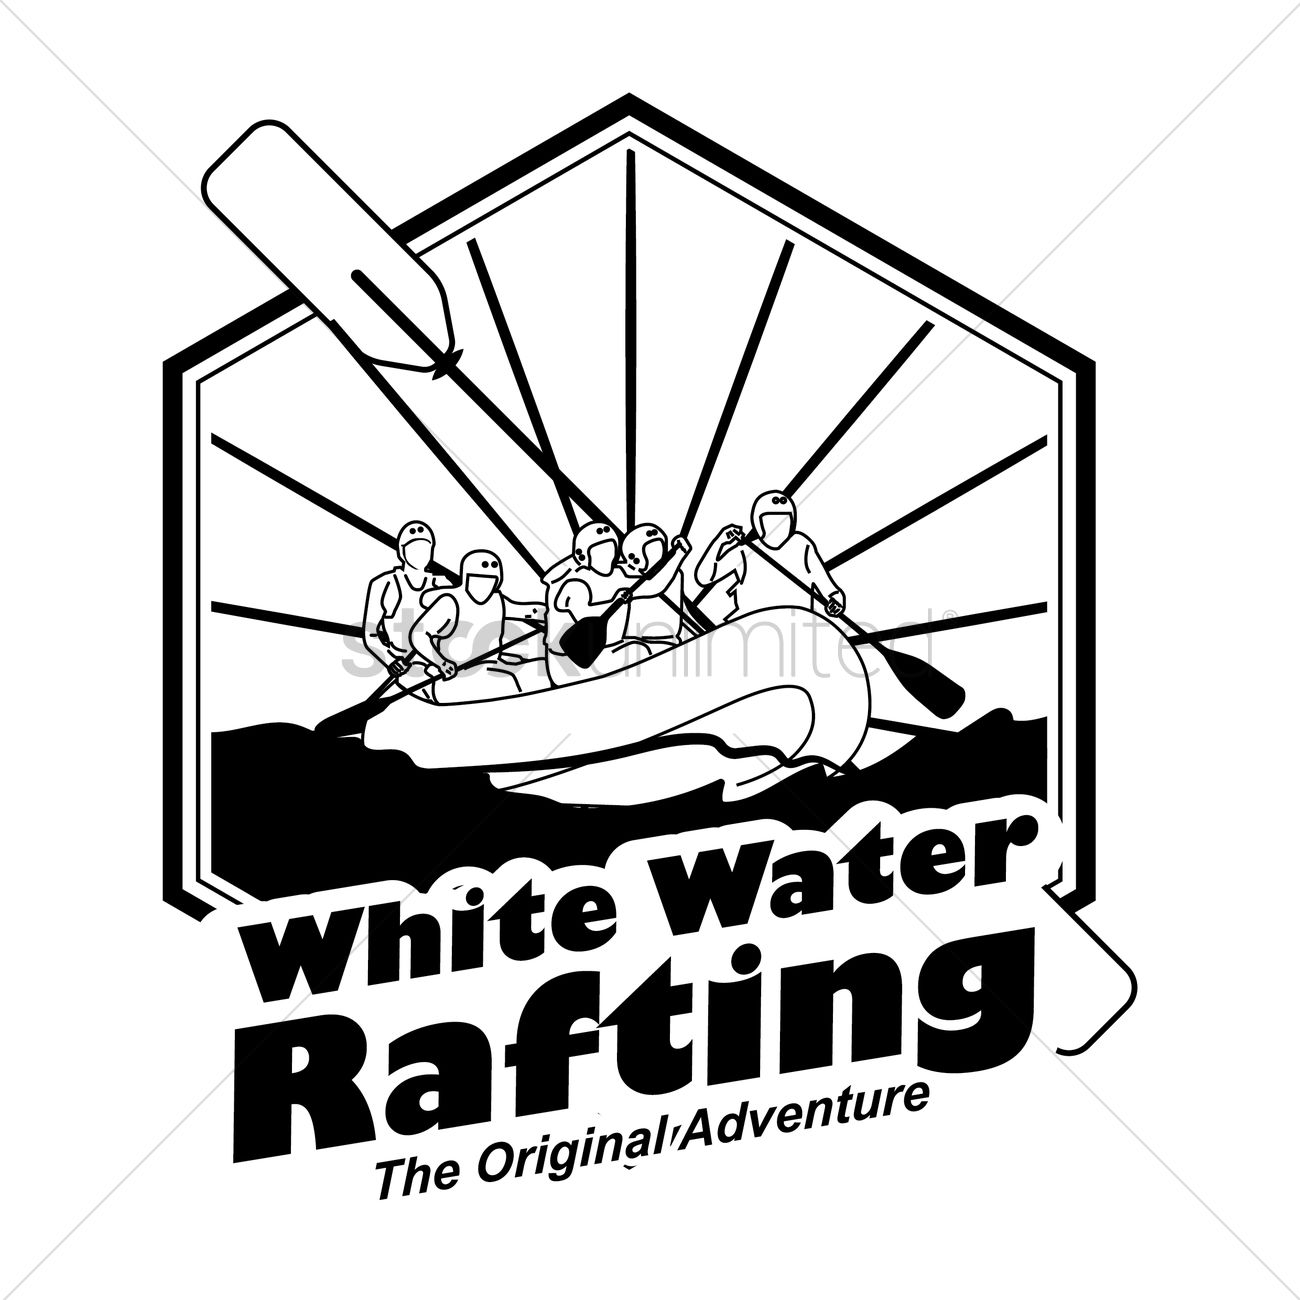 White water rafting label Vector Image